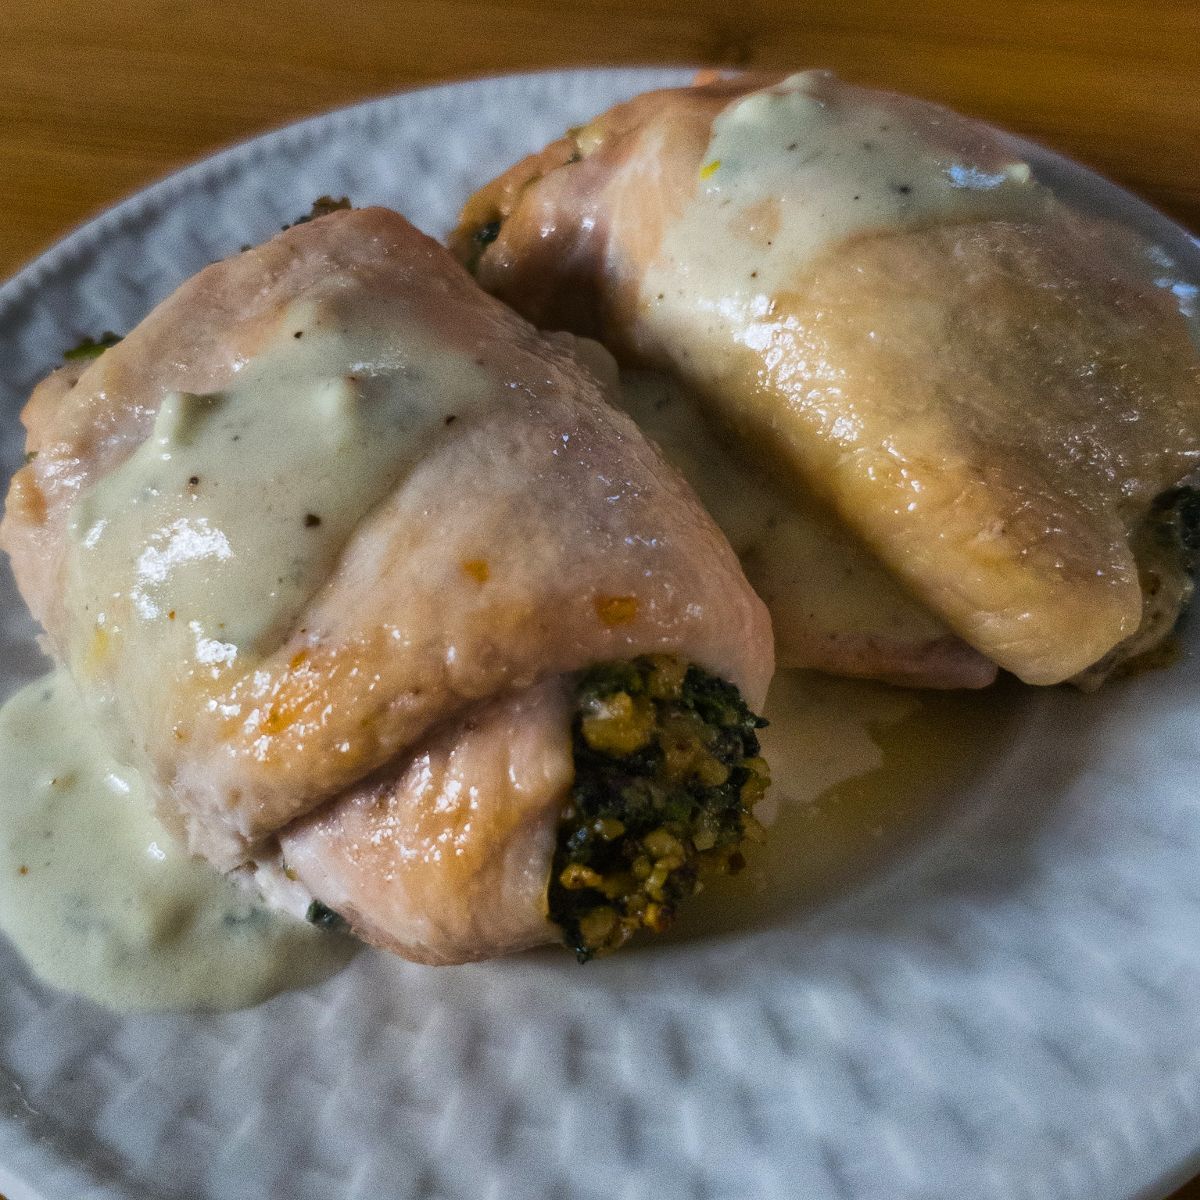 Walnut and Spinach Stuffed Chicken recipe with a Blue Cheese Sauce from cleveland cooking.com